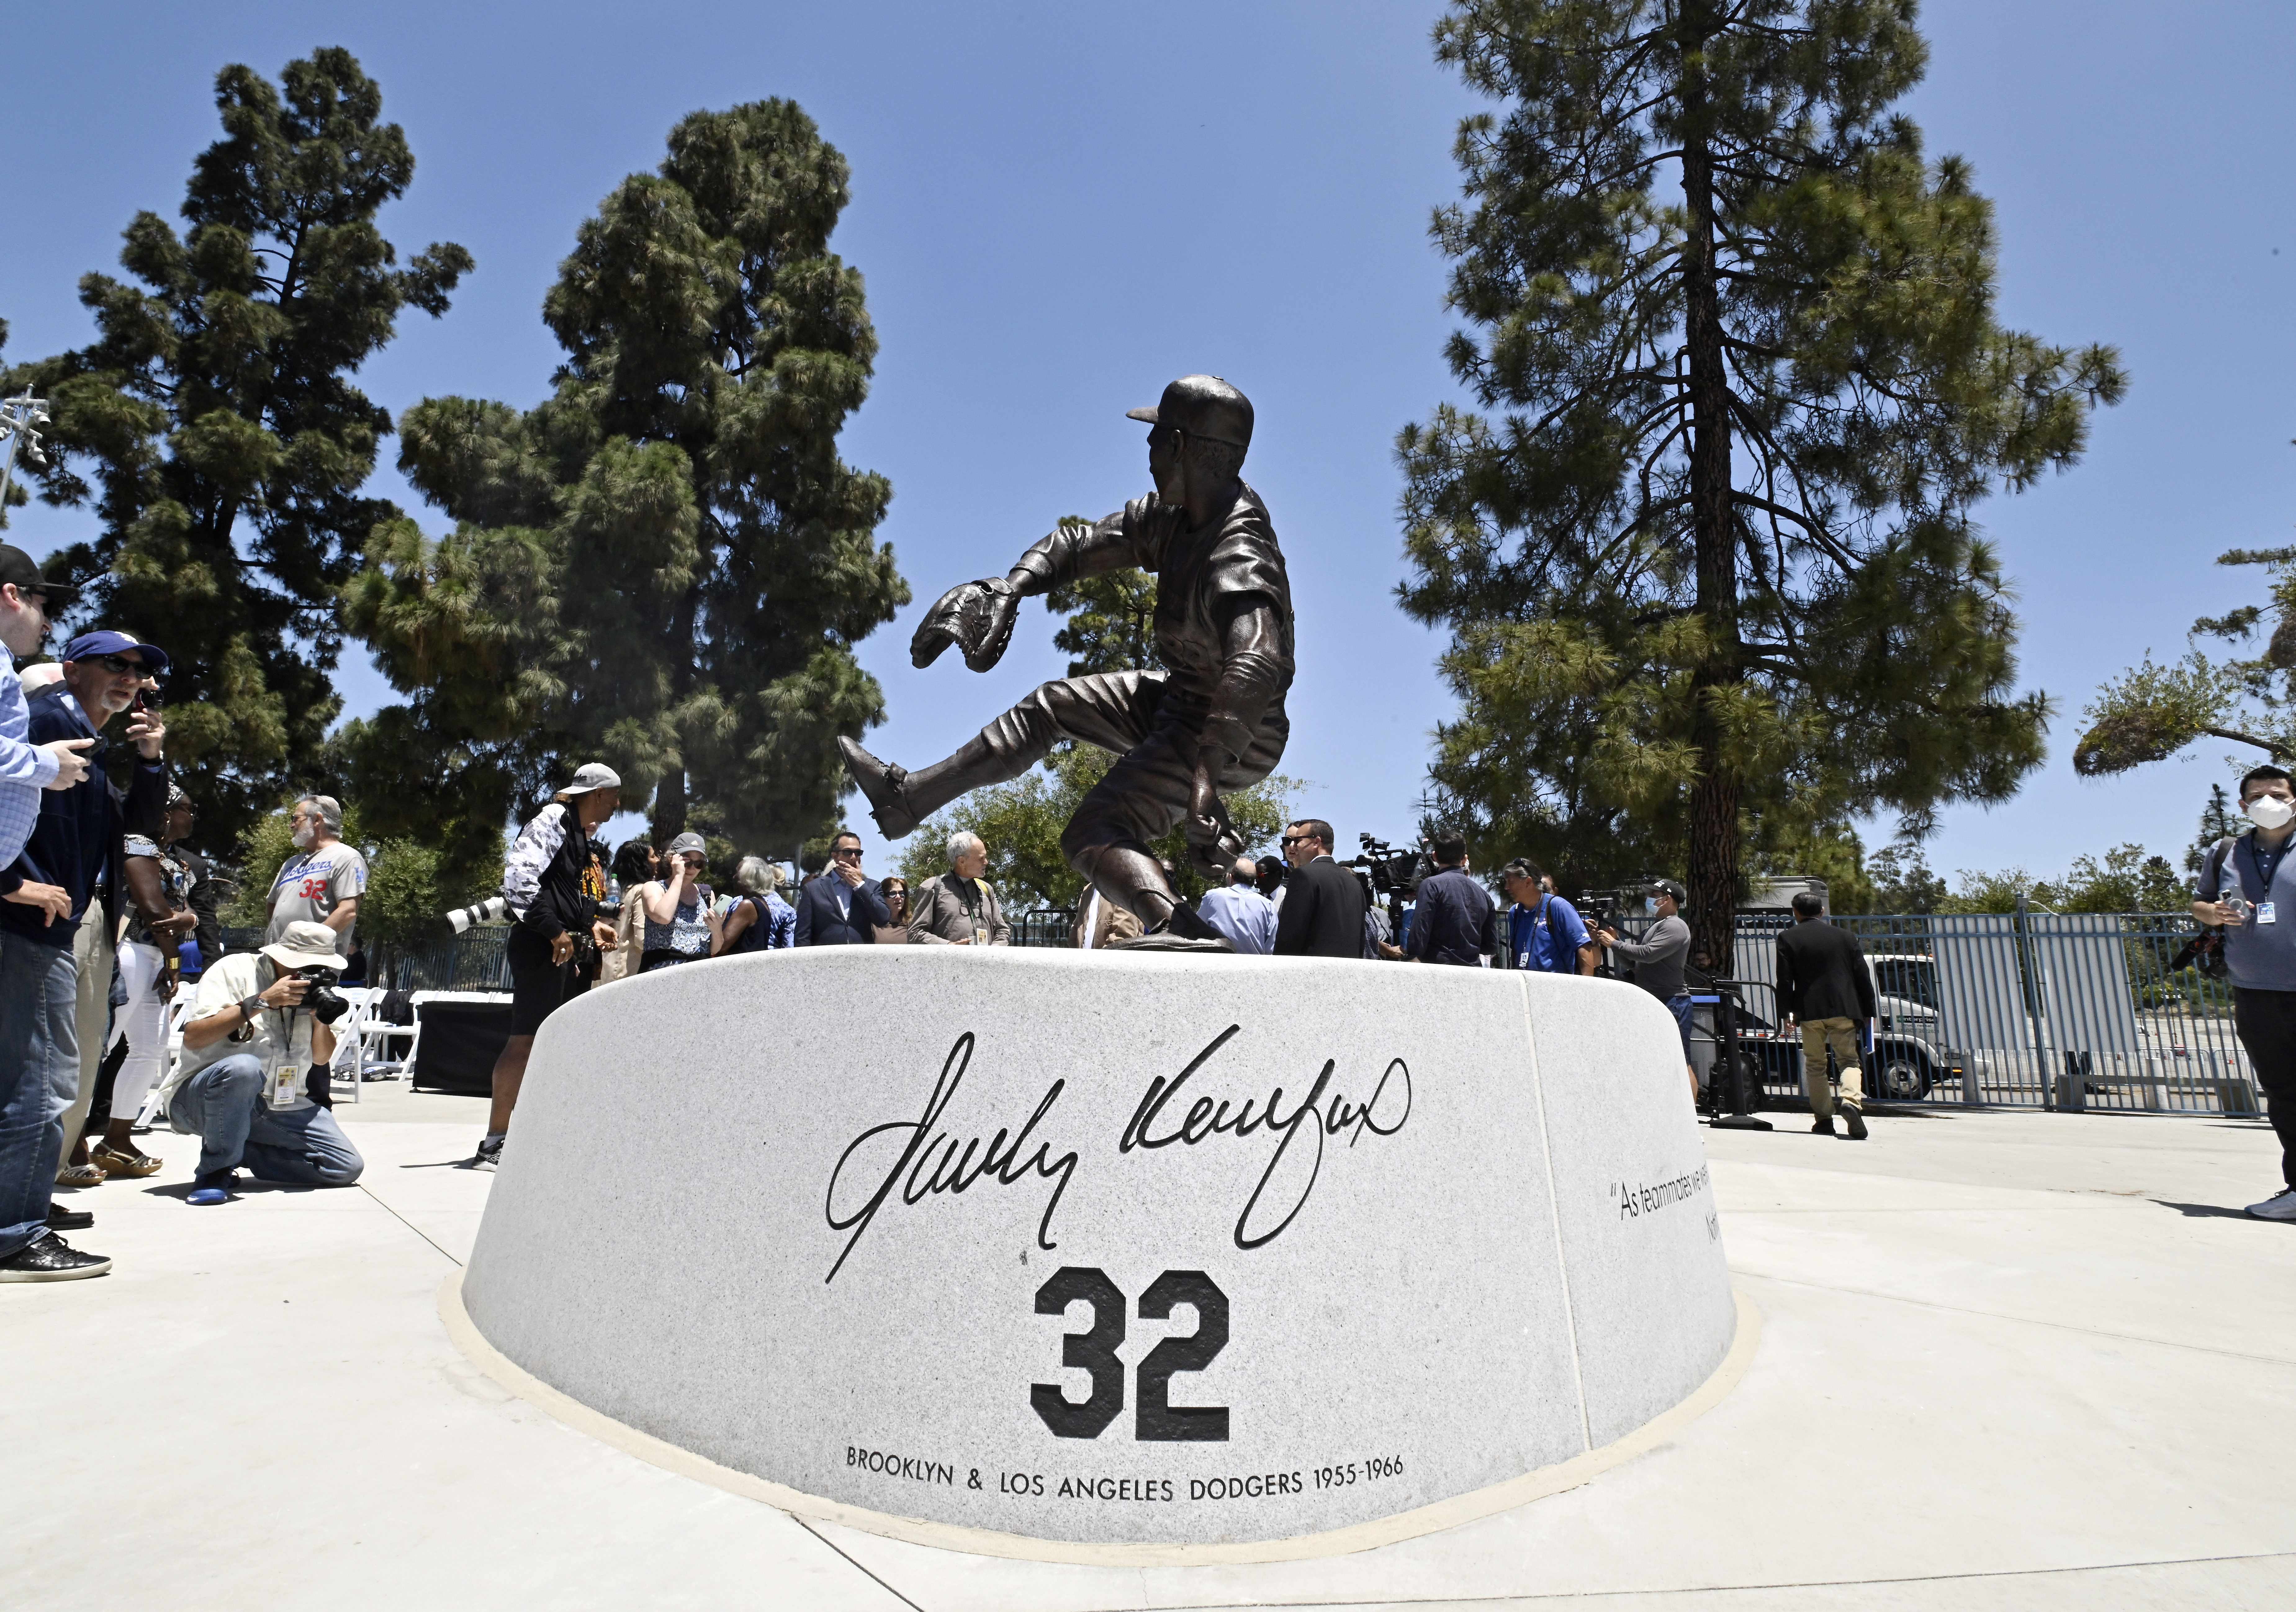 Dodgers Set To Honor Sandy Koufax With Statue Unveiling Before